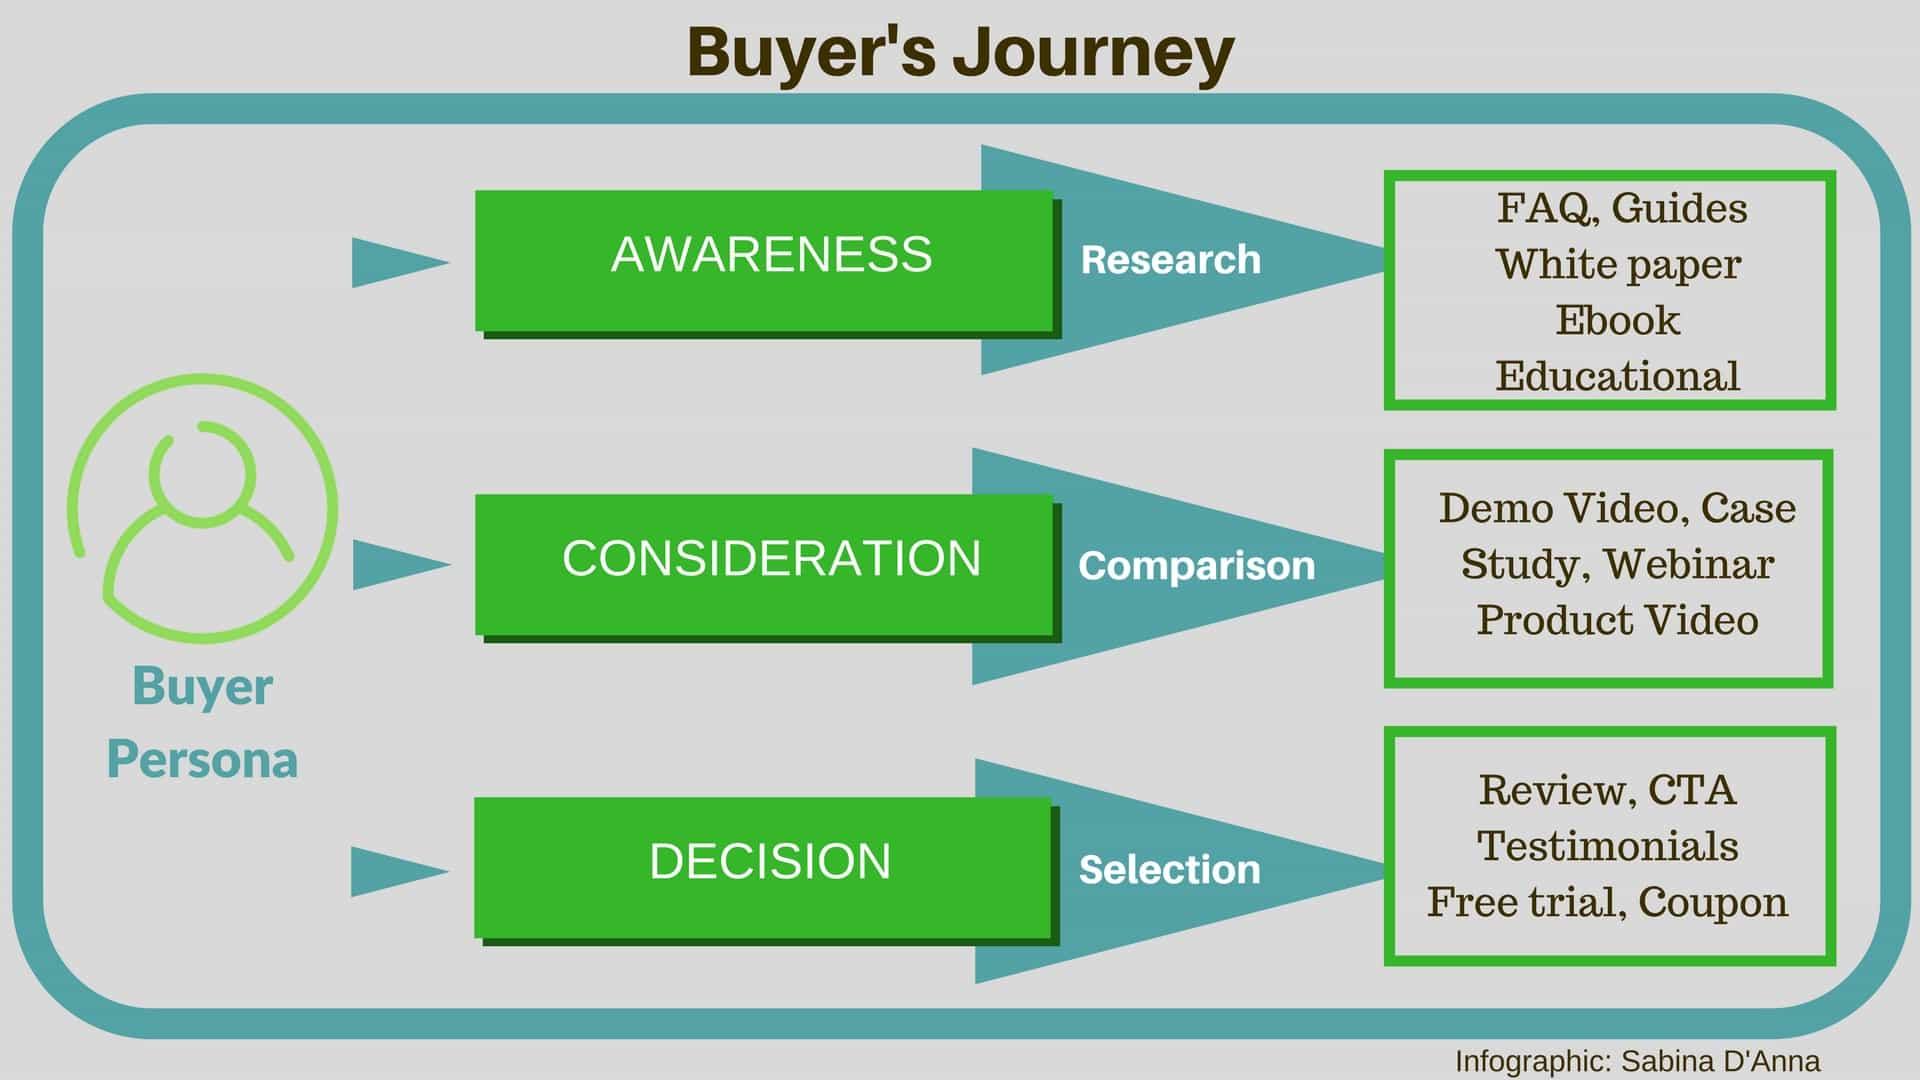 The buyer persona and the buyer's journey are the fundamentals of the Inbound Marketing Methodology